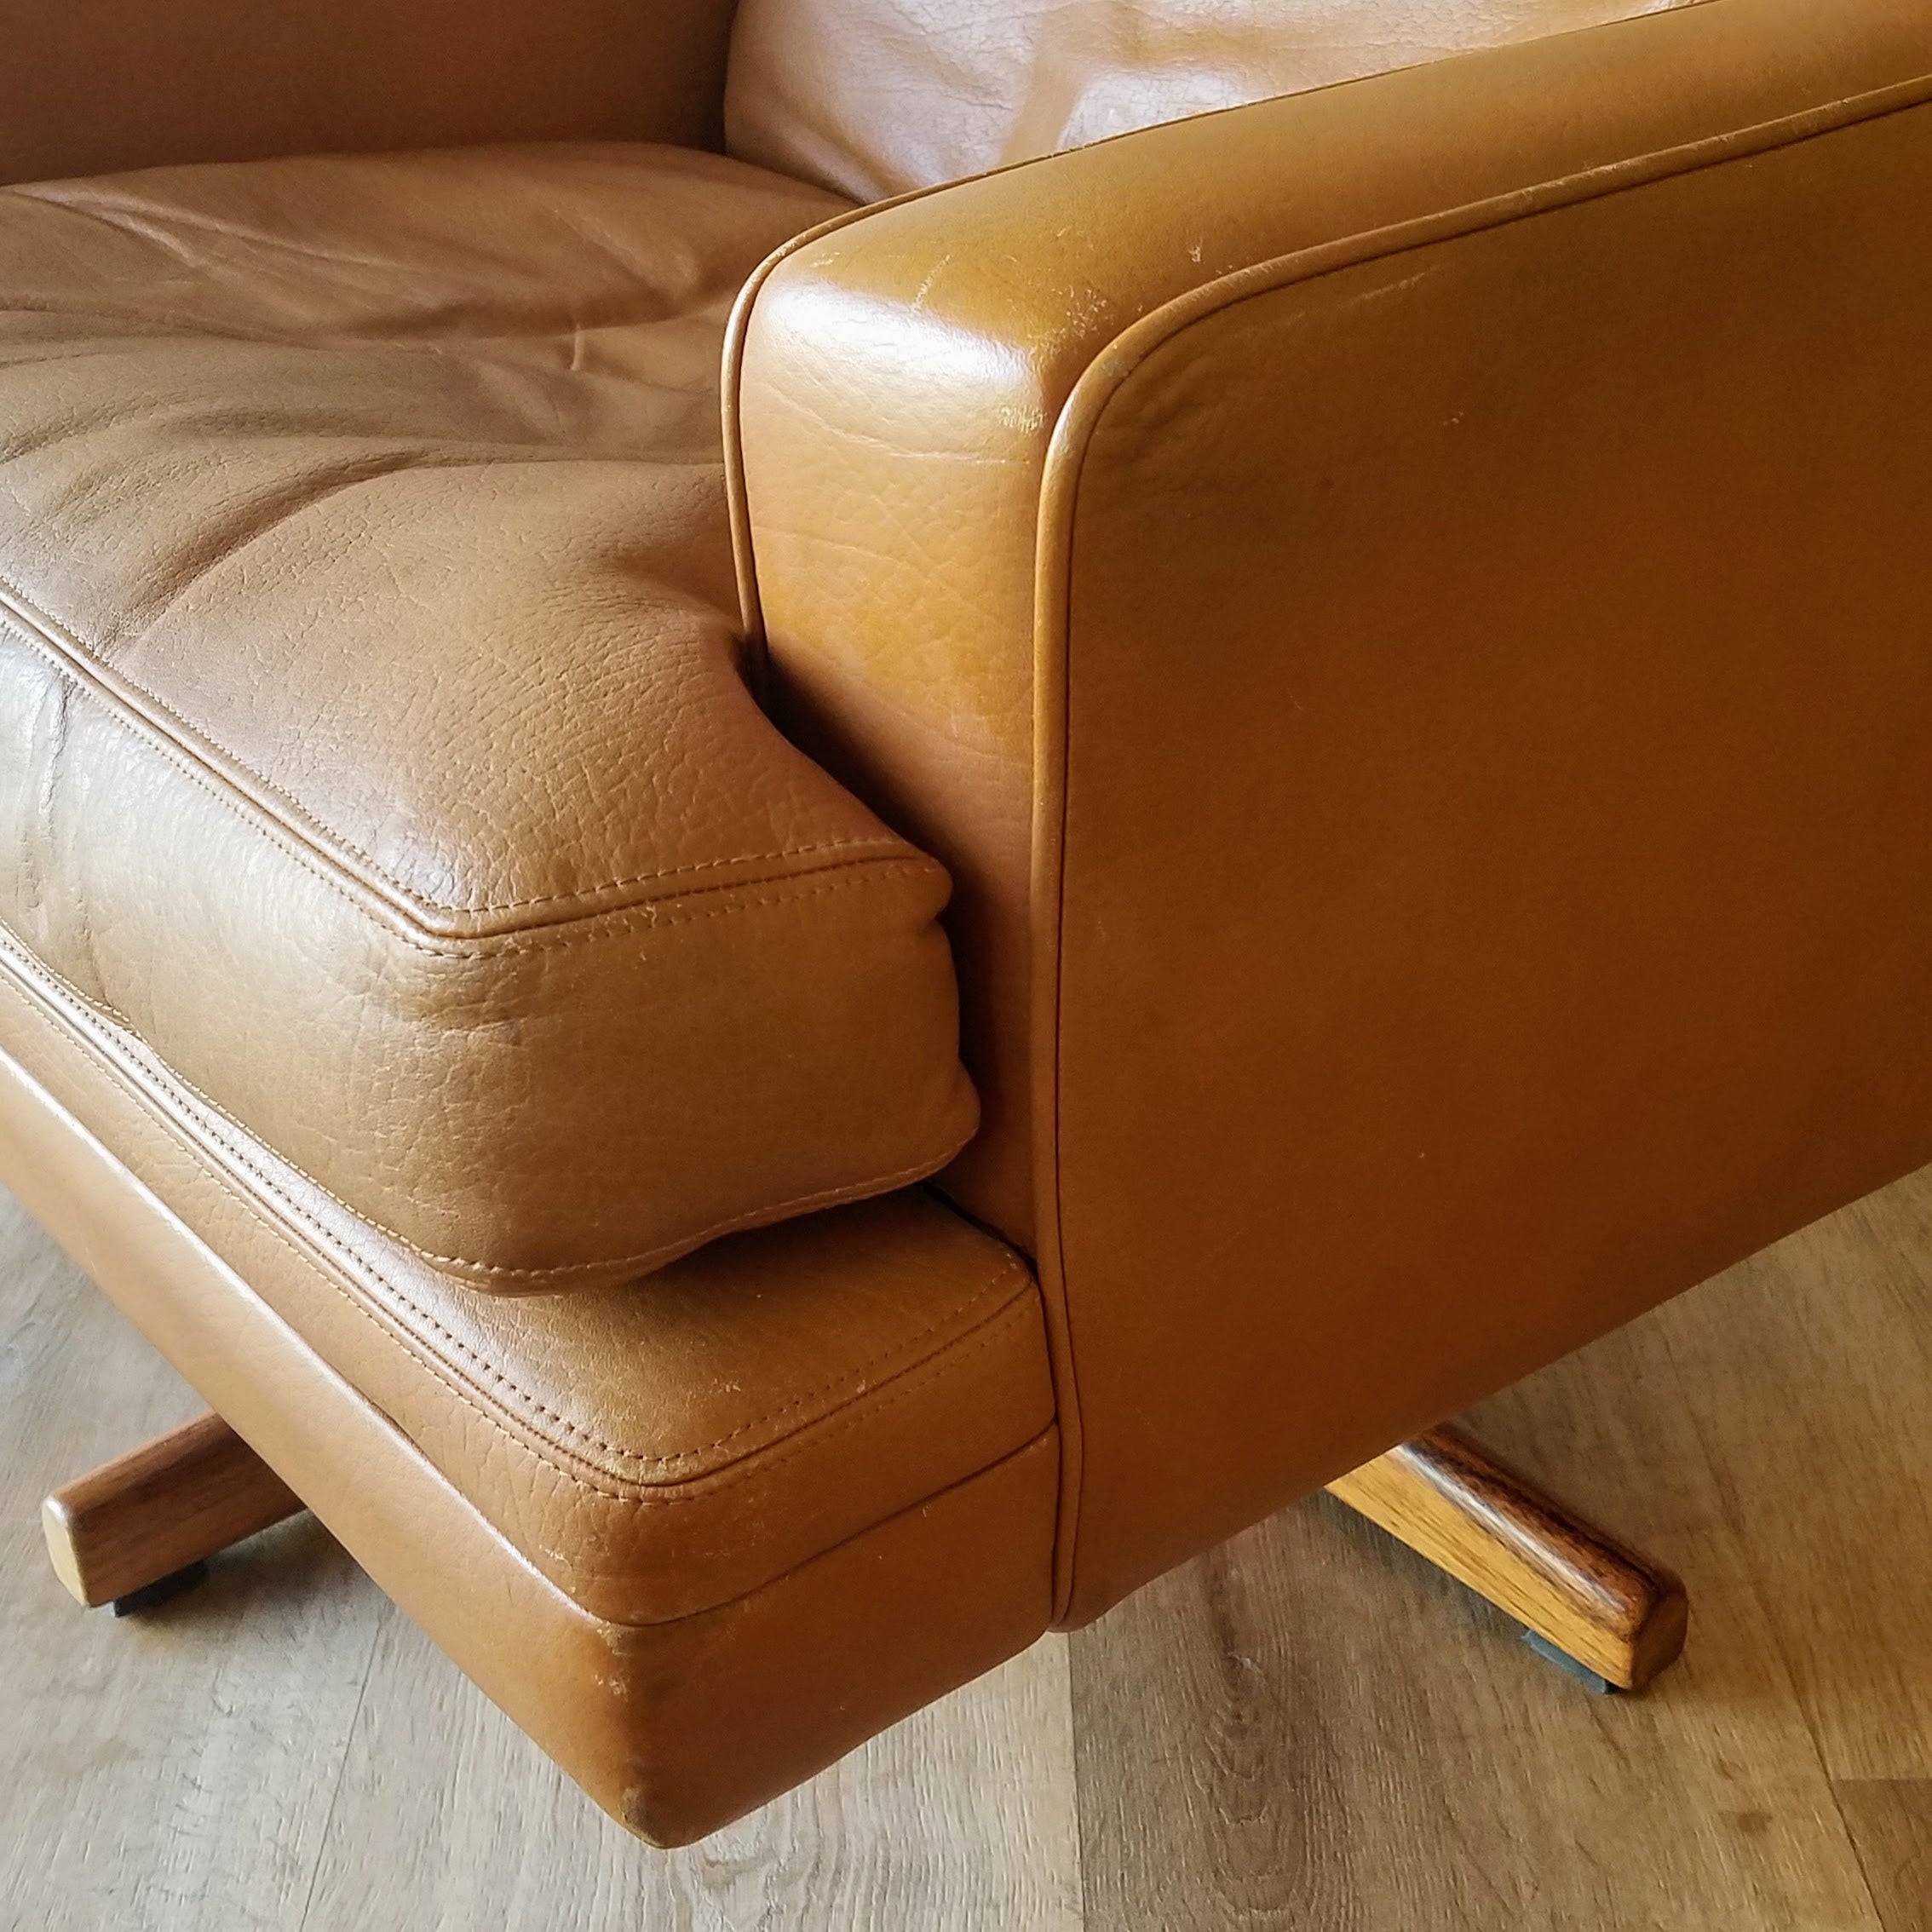 Fredrik A. Kayser Leather Recliner and Ottoman